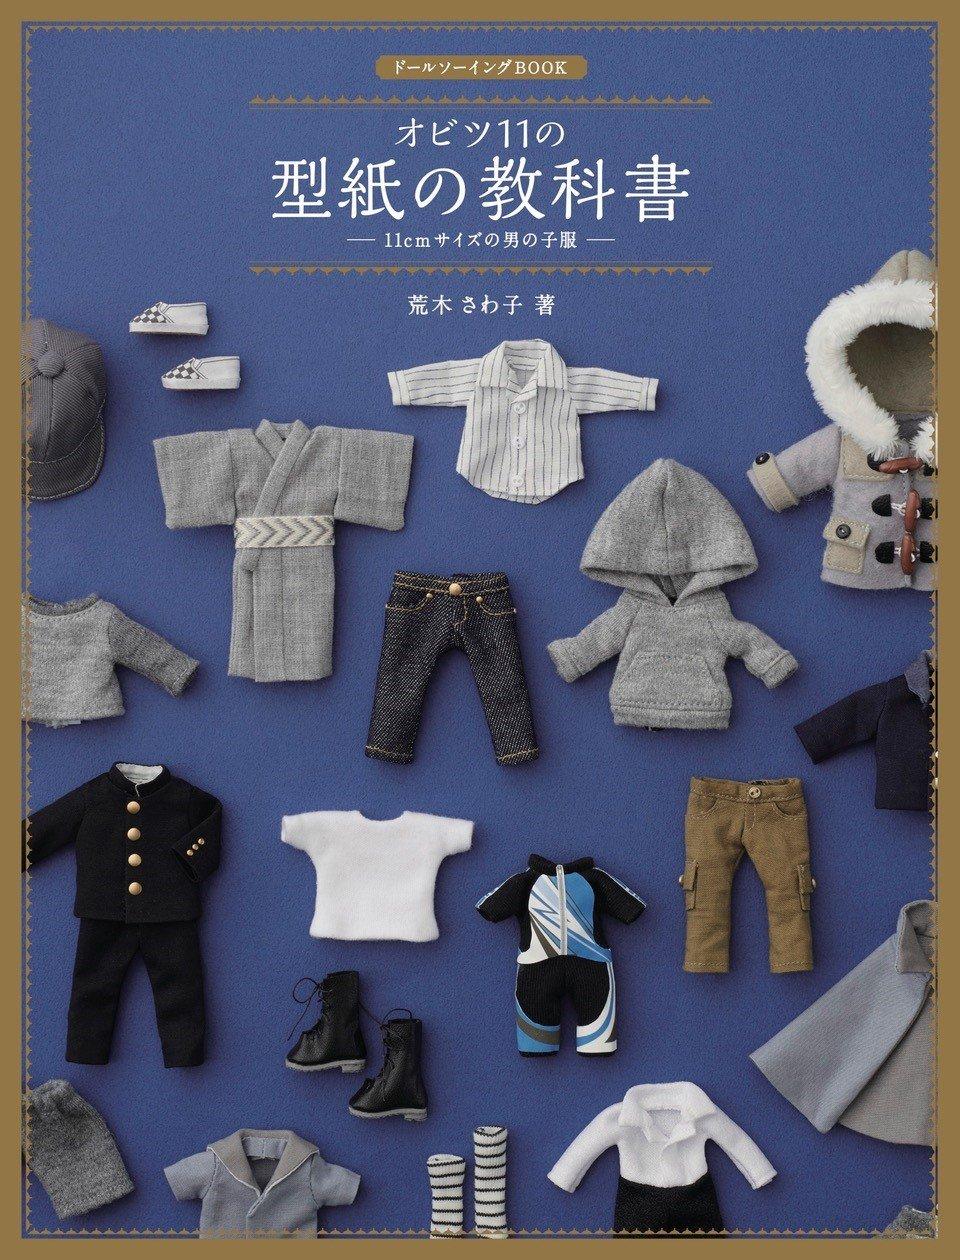 Doll Sewing Book Obitsu 11's Textbook - 11 cm Size Boy Clothes (Japanese Edition)